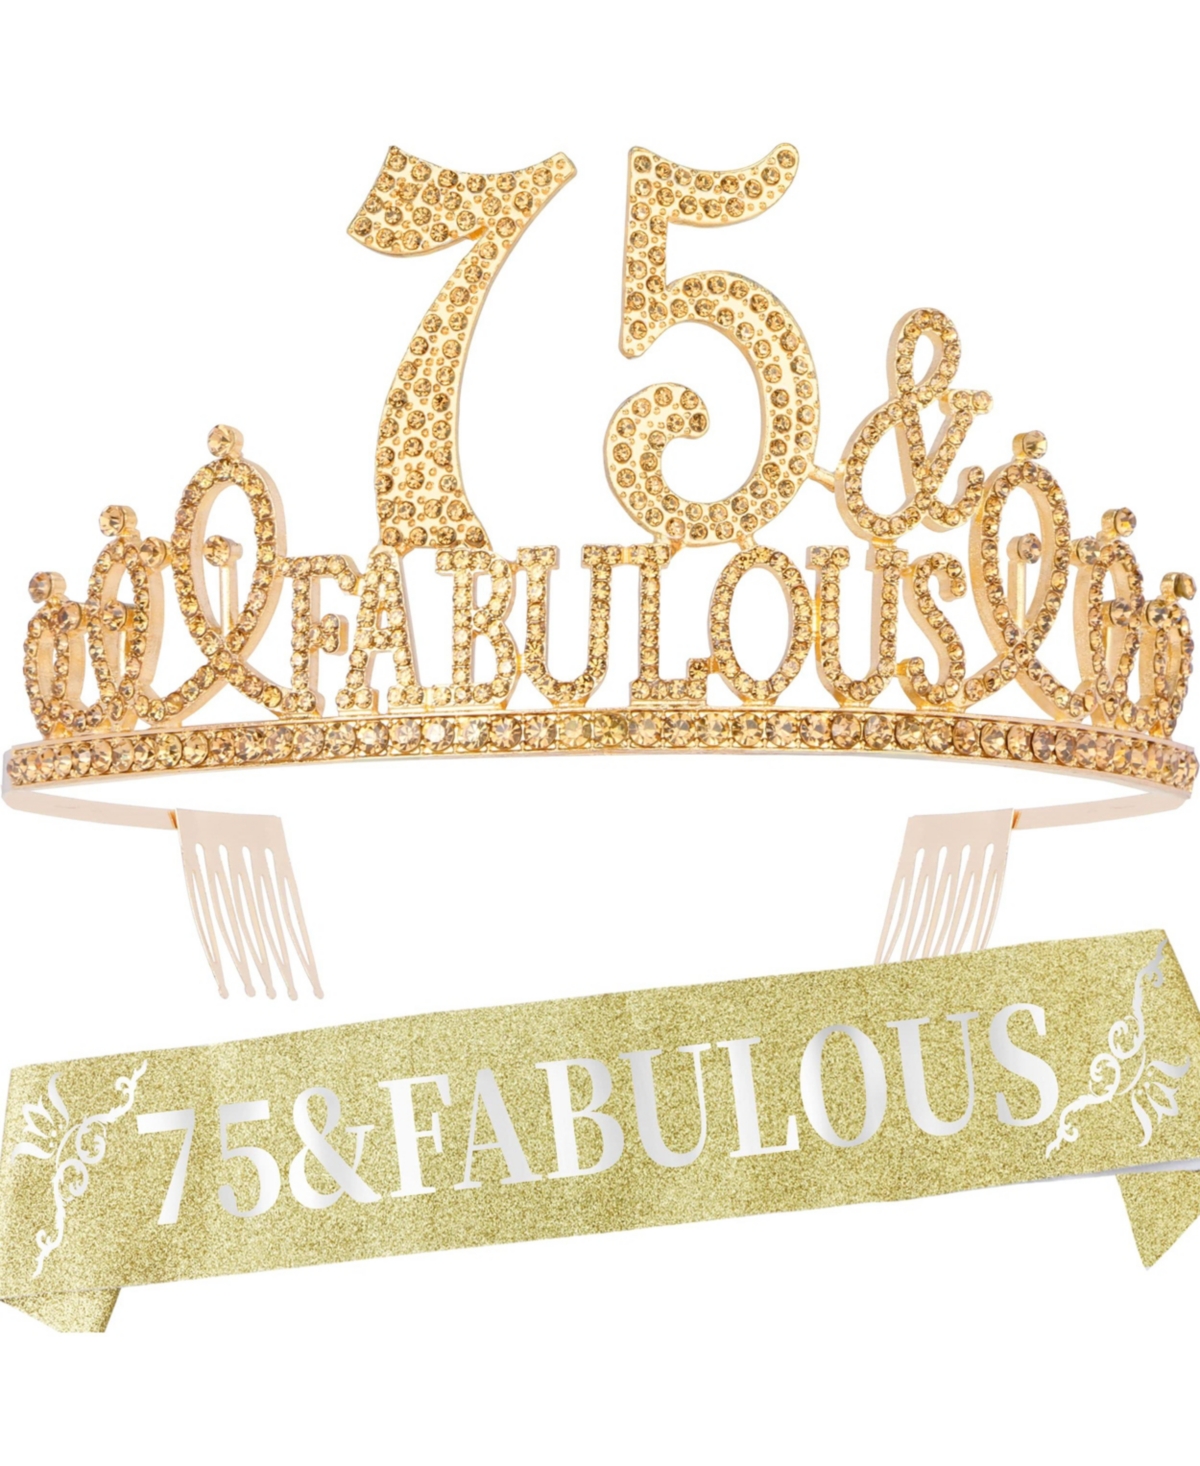 75th Birthday Sash and Tiara for Women - Glitter Sash and Rhinestone Gold Metal Tiara, Perfect for Her 75th Birthday Celebration and Gifts - Pink